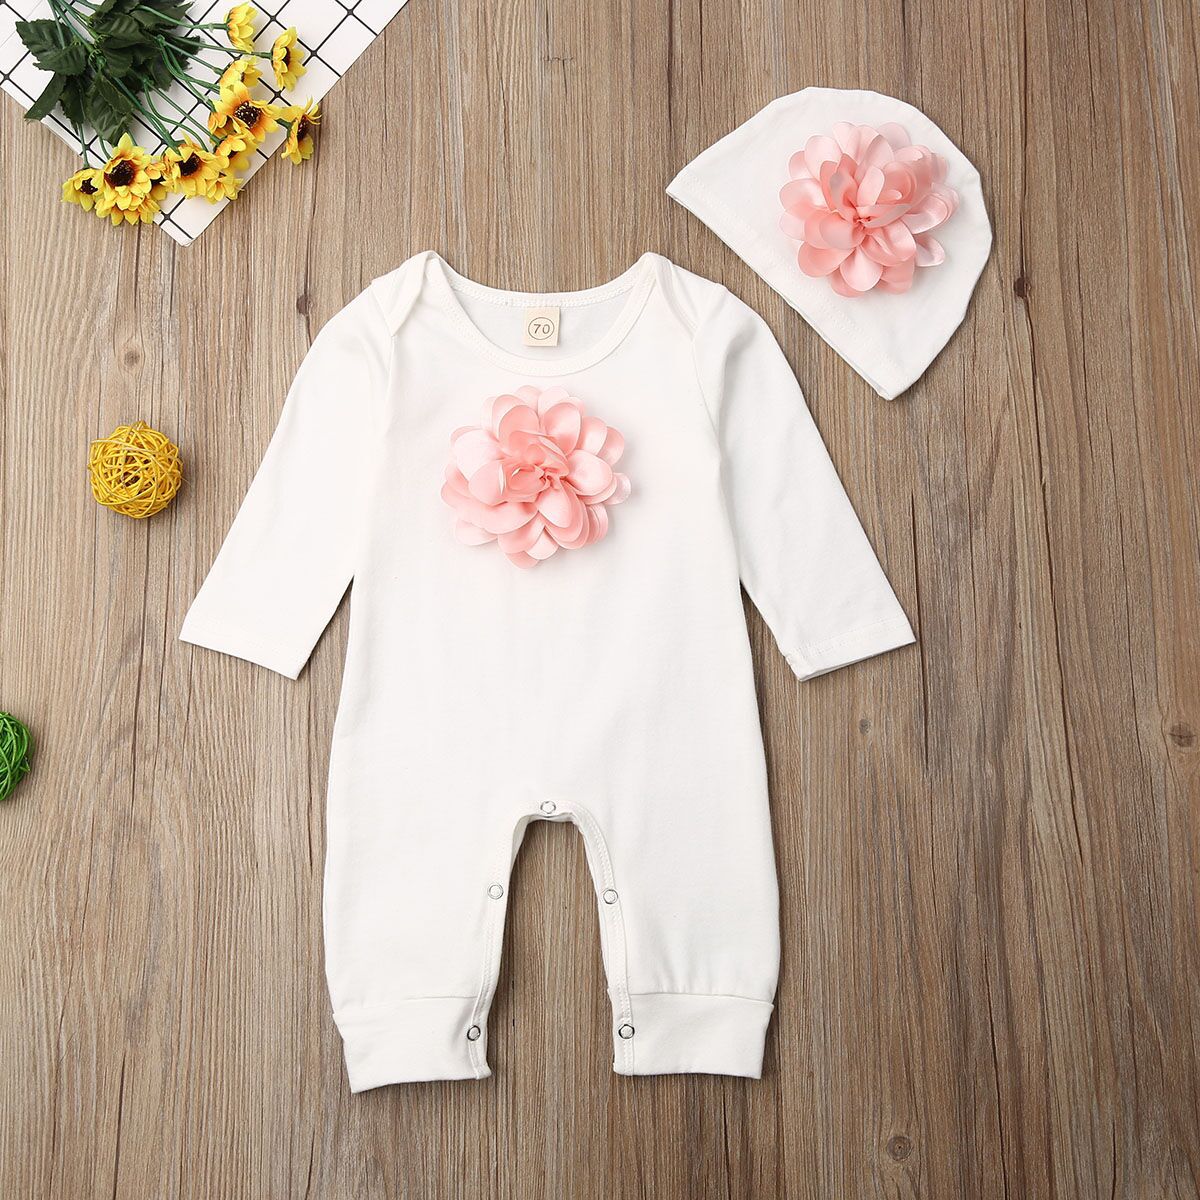 Spring-Autumn Newborn Baby Cotton Clothing Romper Boys Animal Costumes Boutique Pajama Roupa for Baby Christmas Gift 5